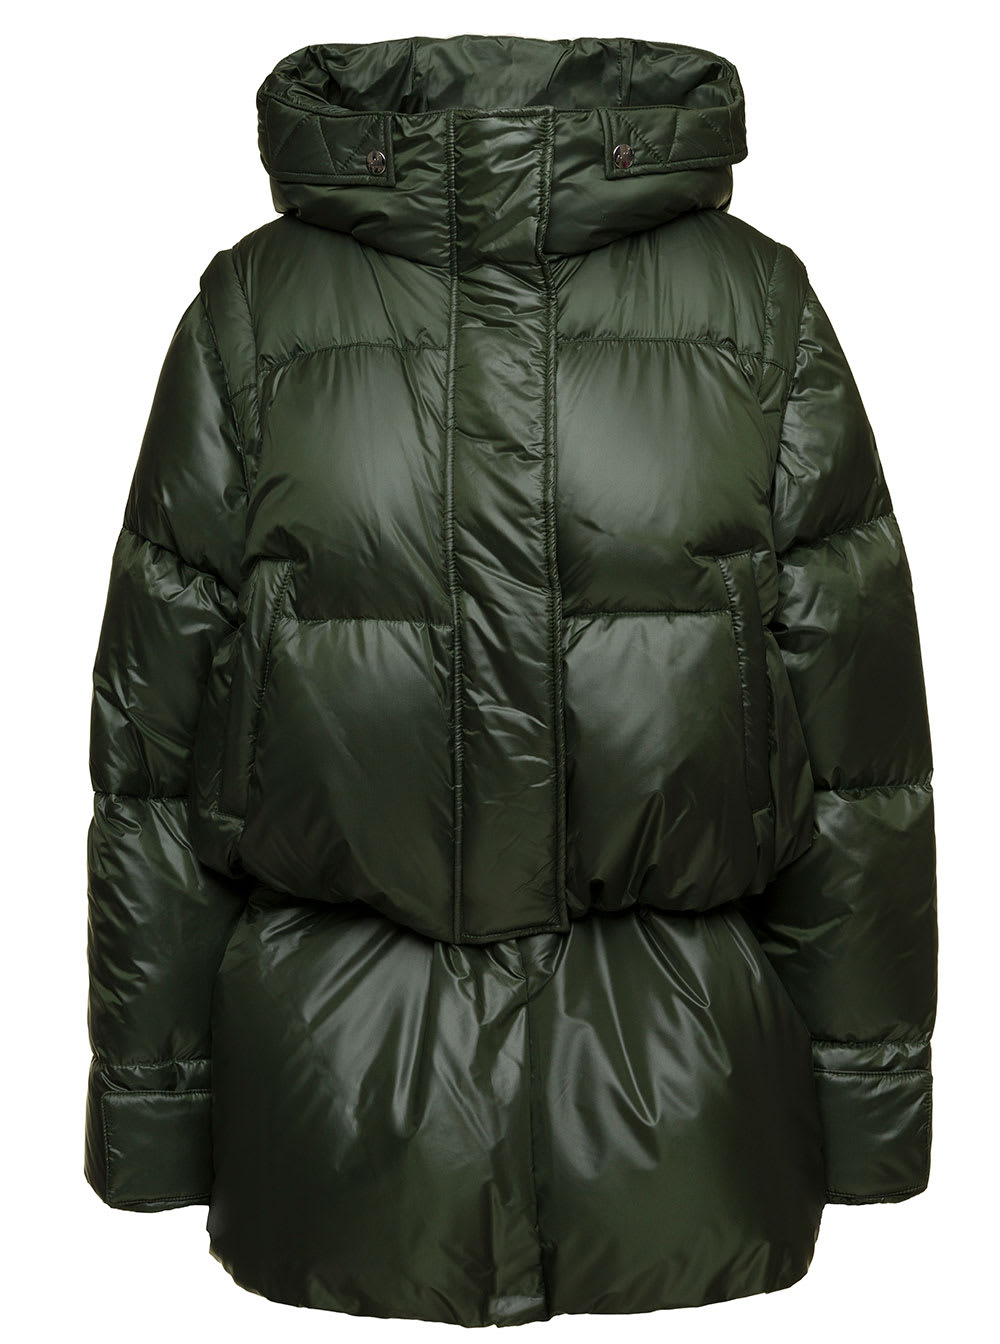 chiara Military Green Down Jacket With Detachable Sleeves And End Band With Shiny Finish In Nylon Woman Anitroc